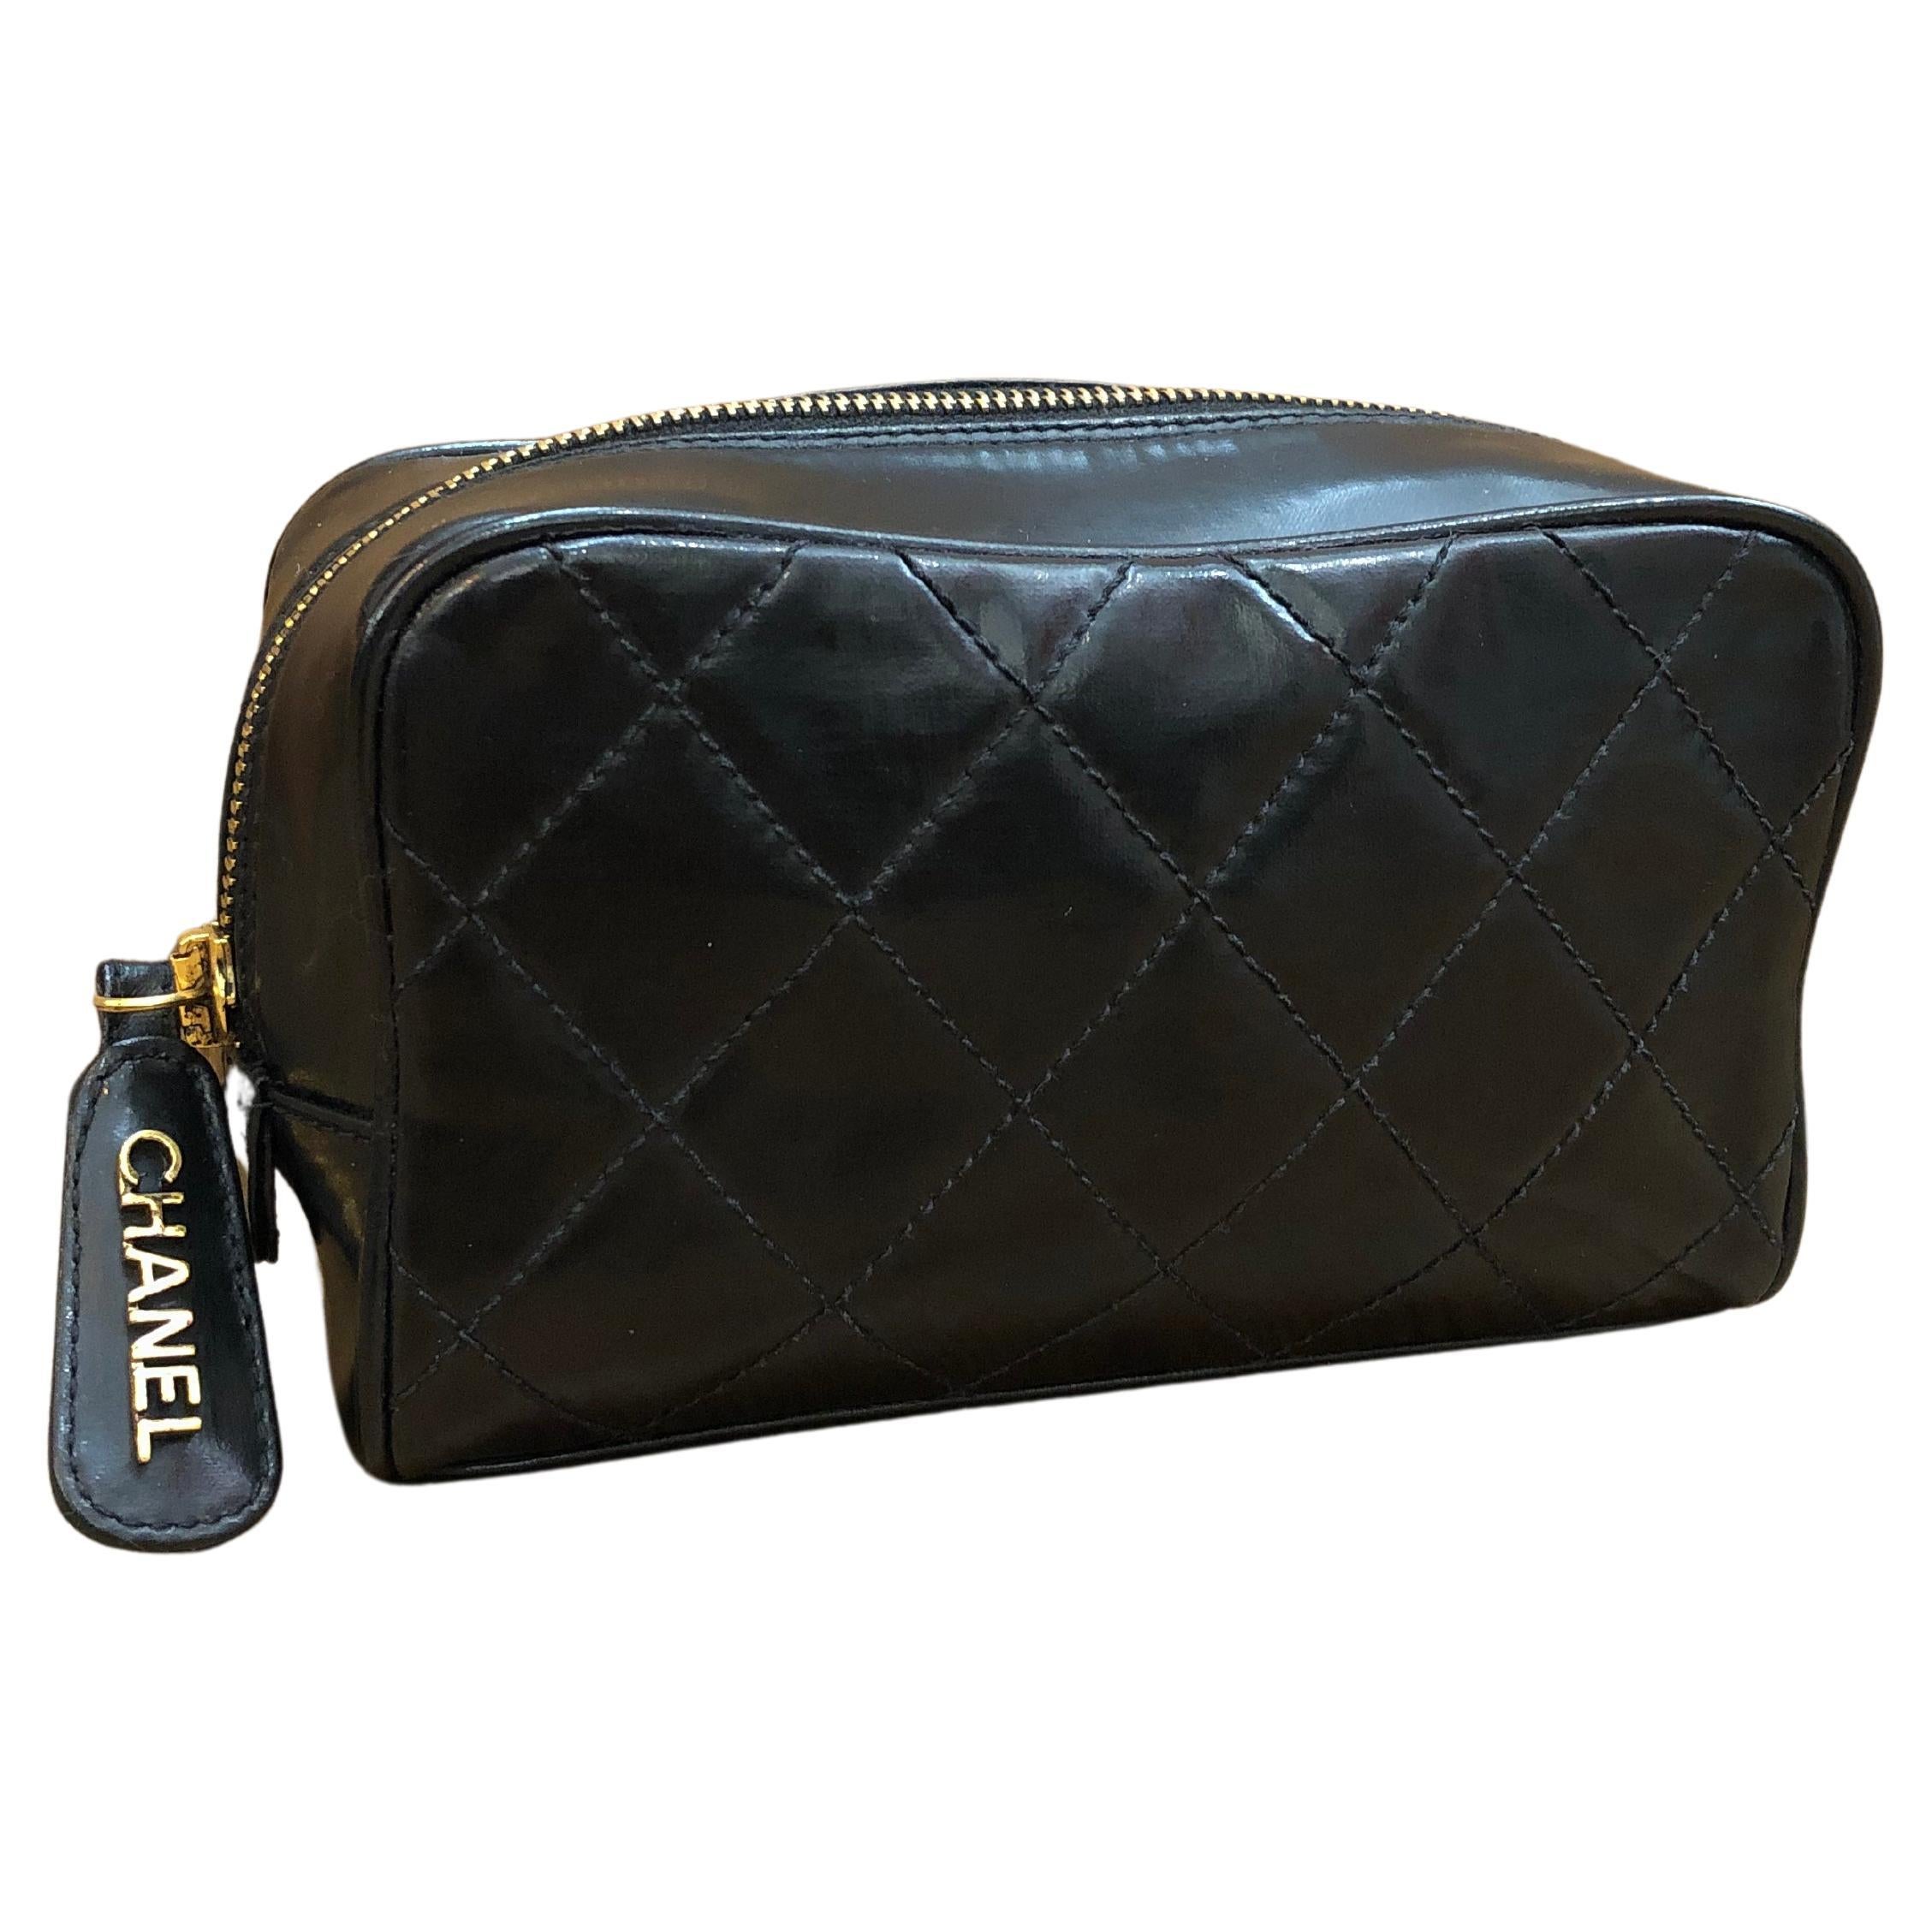 1990s Vintage CHANEL Coated Canvas Vanity Pouch Clutch Bag Black For Sale